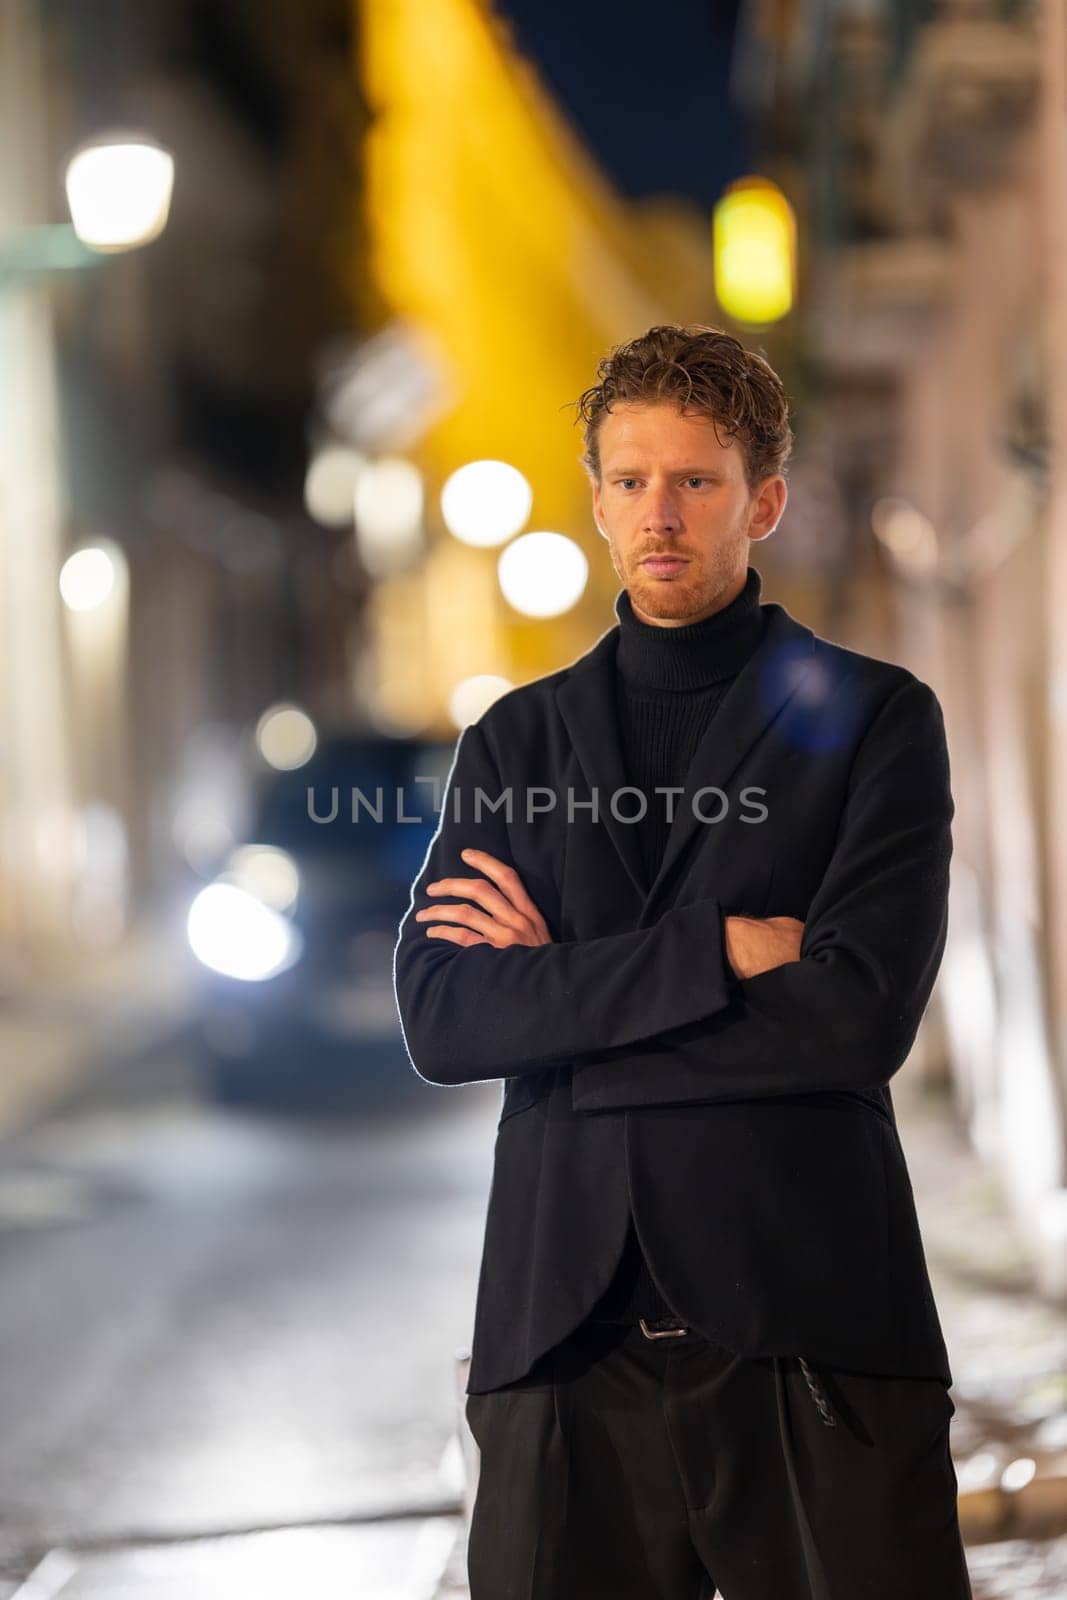 A handsome man is standing in the street with his arms crossed. He is wearing a black jacket and a black tie. The street is lit up with bright lights, creating a moody atmosphere